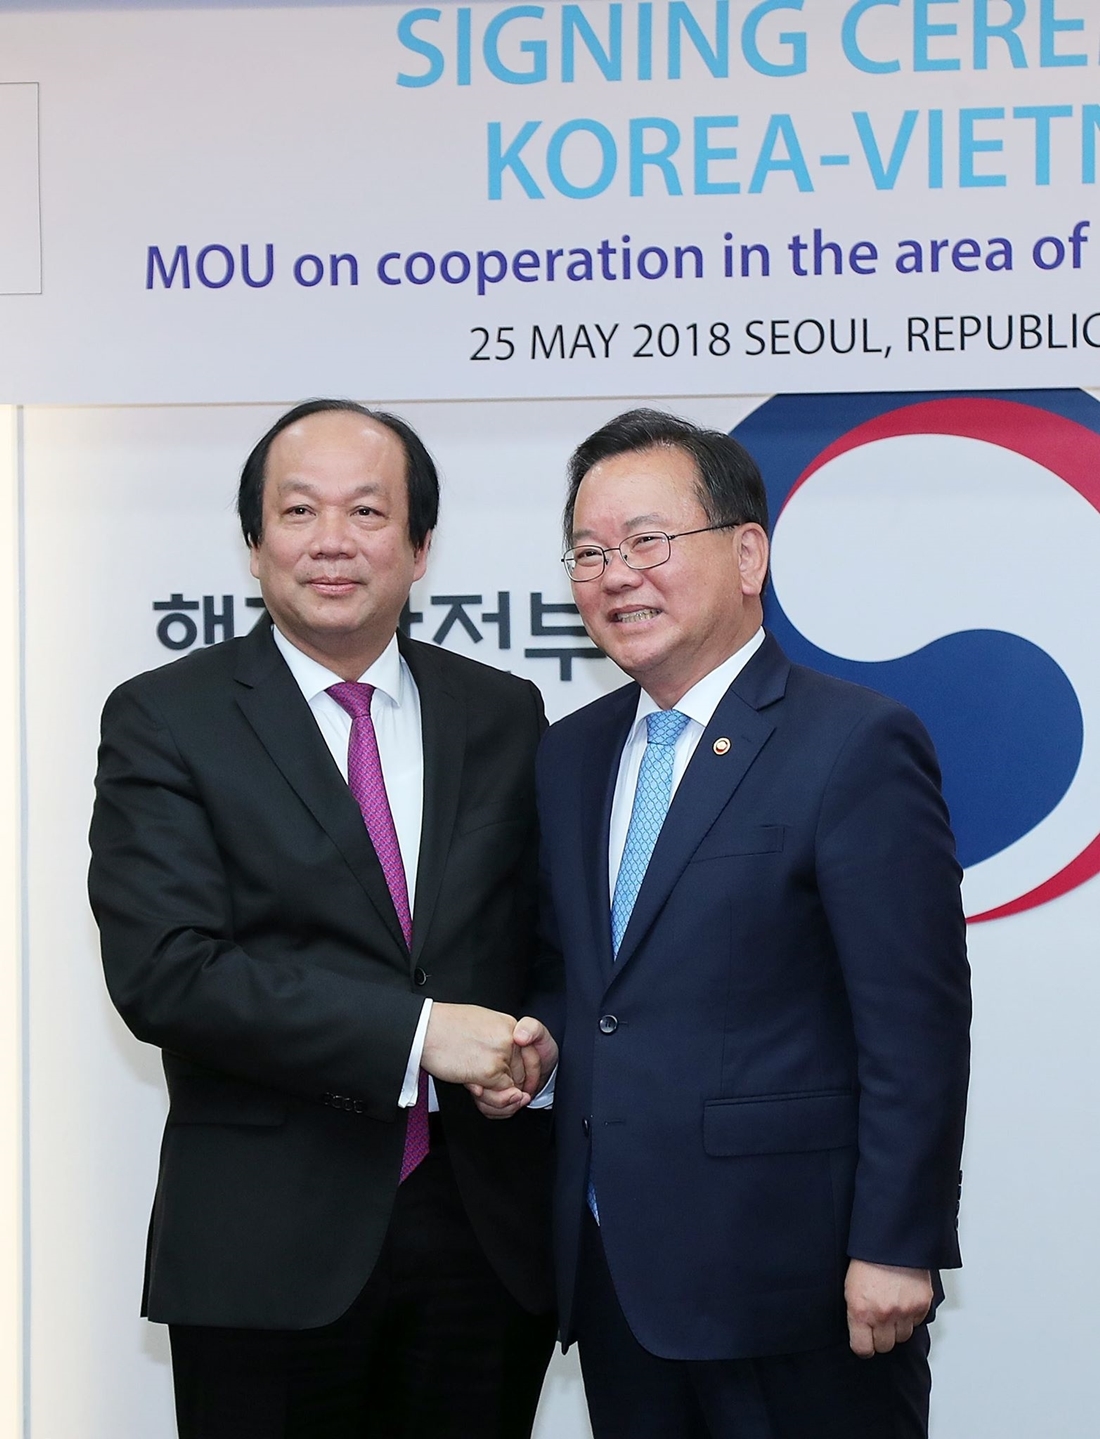 Minister of the Interior and Safety Kim Boo-kyum and Vietnamese Minister-Chairman of the Government Office Mai Tien Dung inked the Memorandum of Understanding (MOU) for Cooperation on e-Government on May 25, at the Government Complex Seoul.